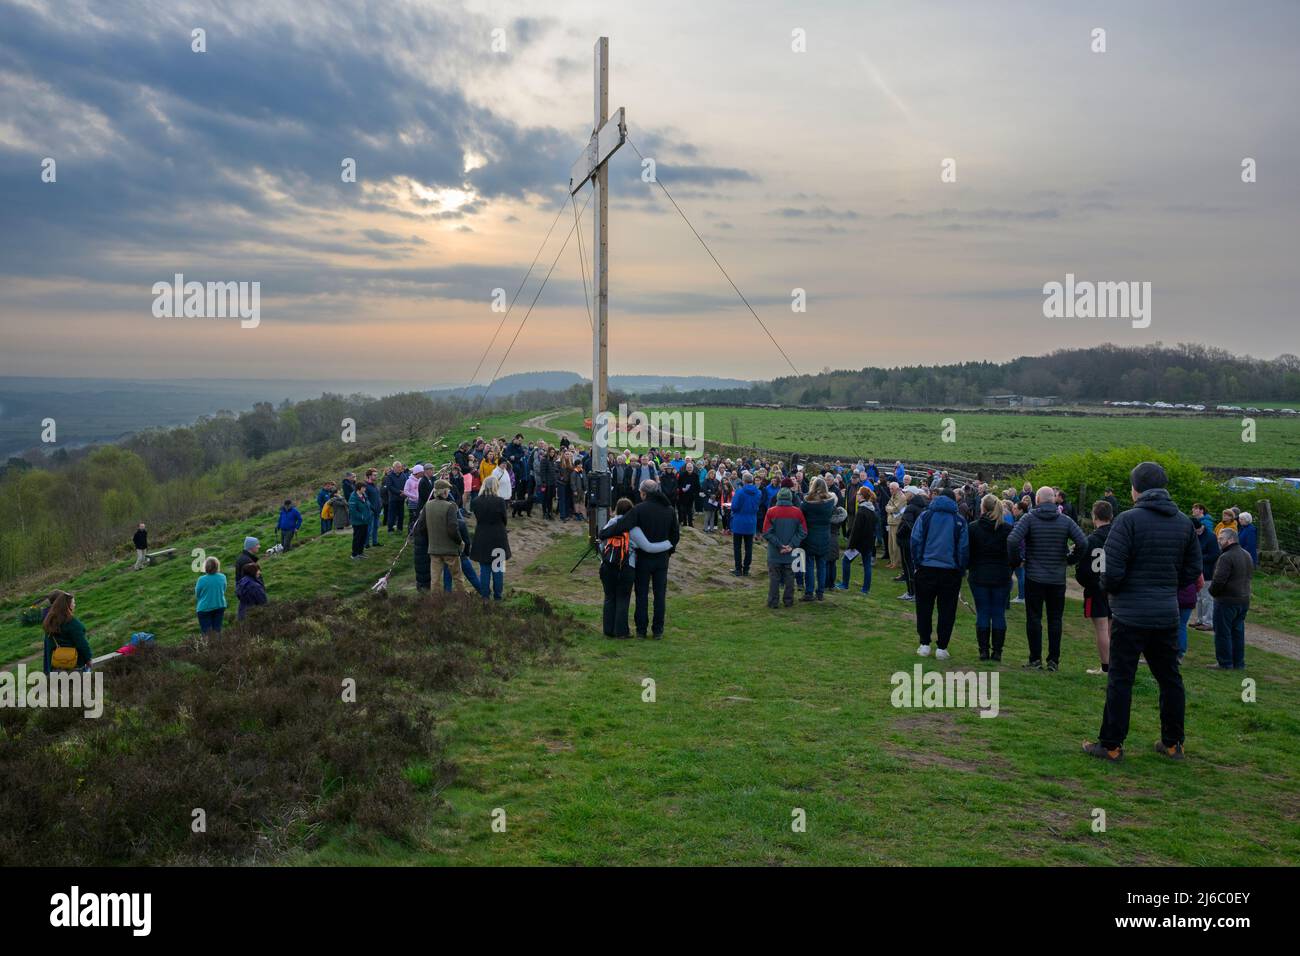 Congregation crowd gathered on hilltop for traditional Easter Sunday dawn service by high wooden cross - The Chevin, Otley, West Yorkshire England UK. Stock Photo